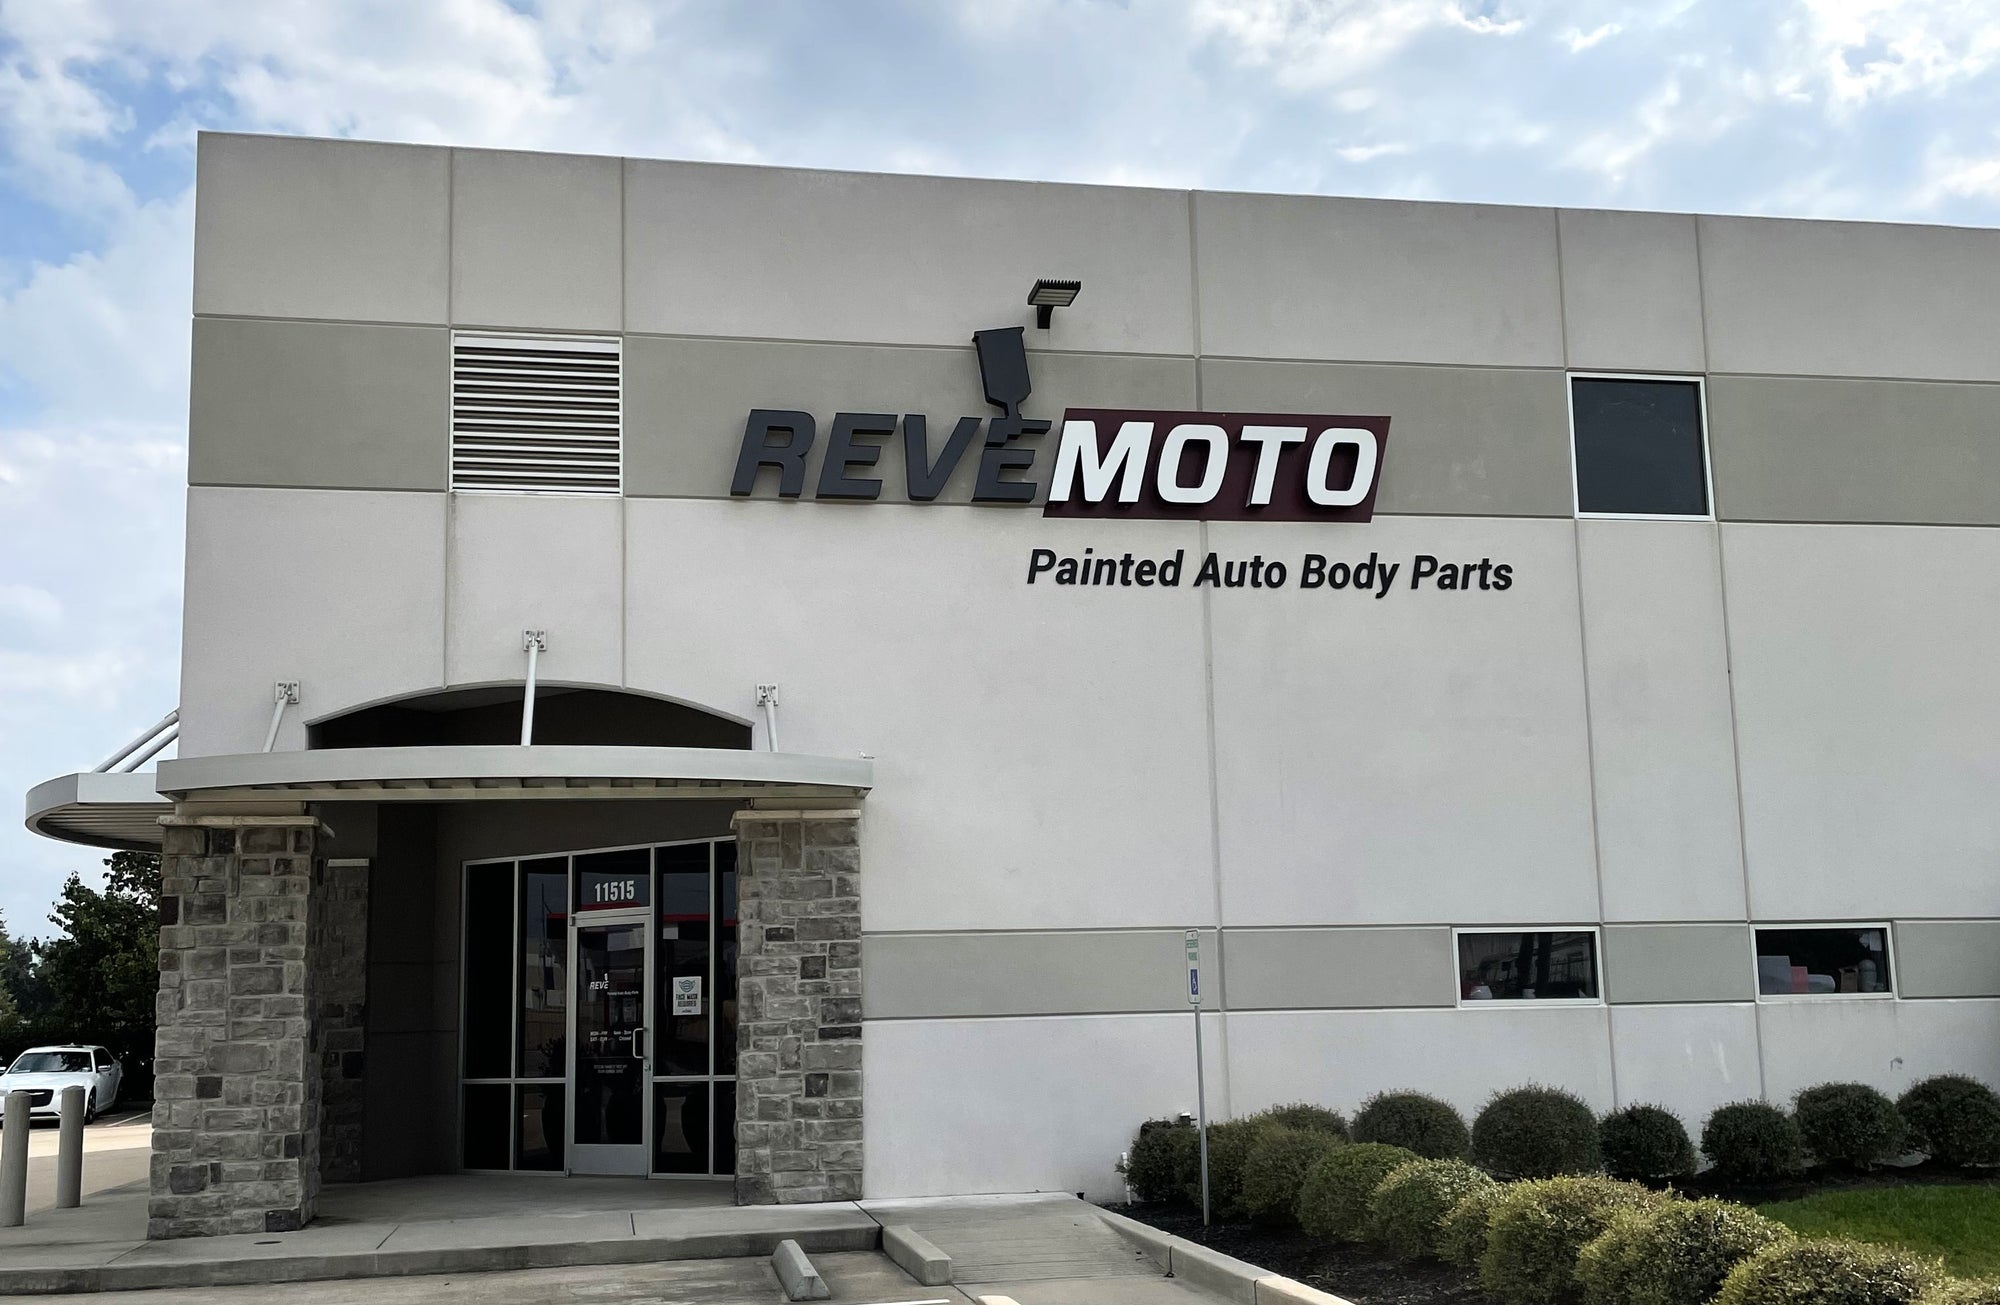 ReveMoto Painted Auto Body Parts - Building With Sign - Located in Houston TX